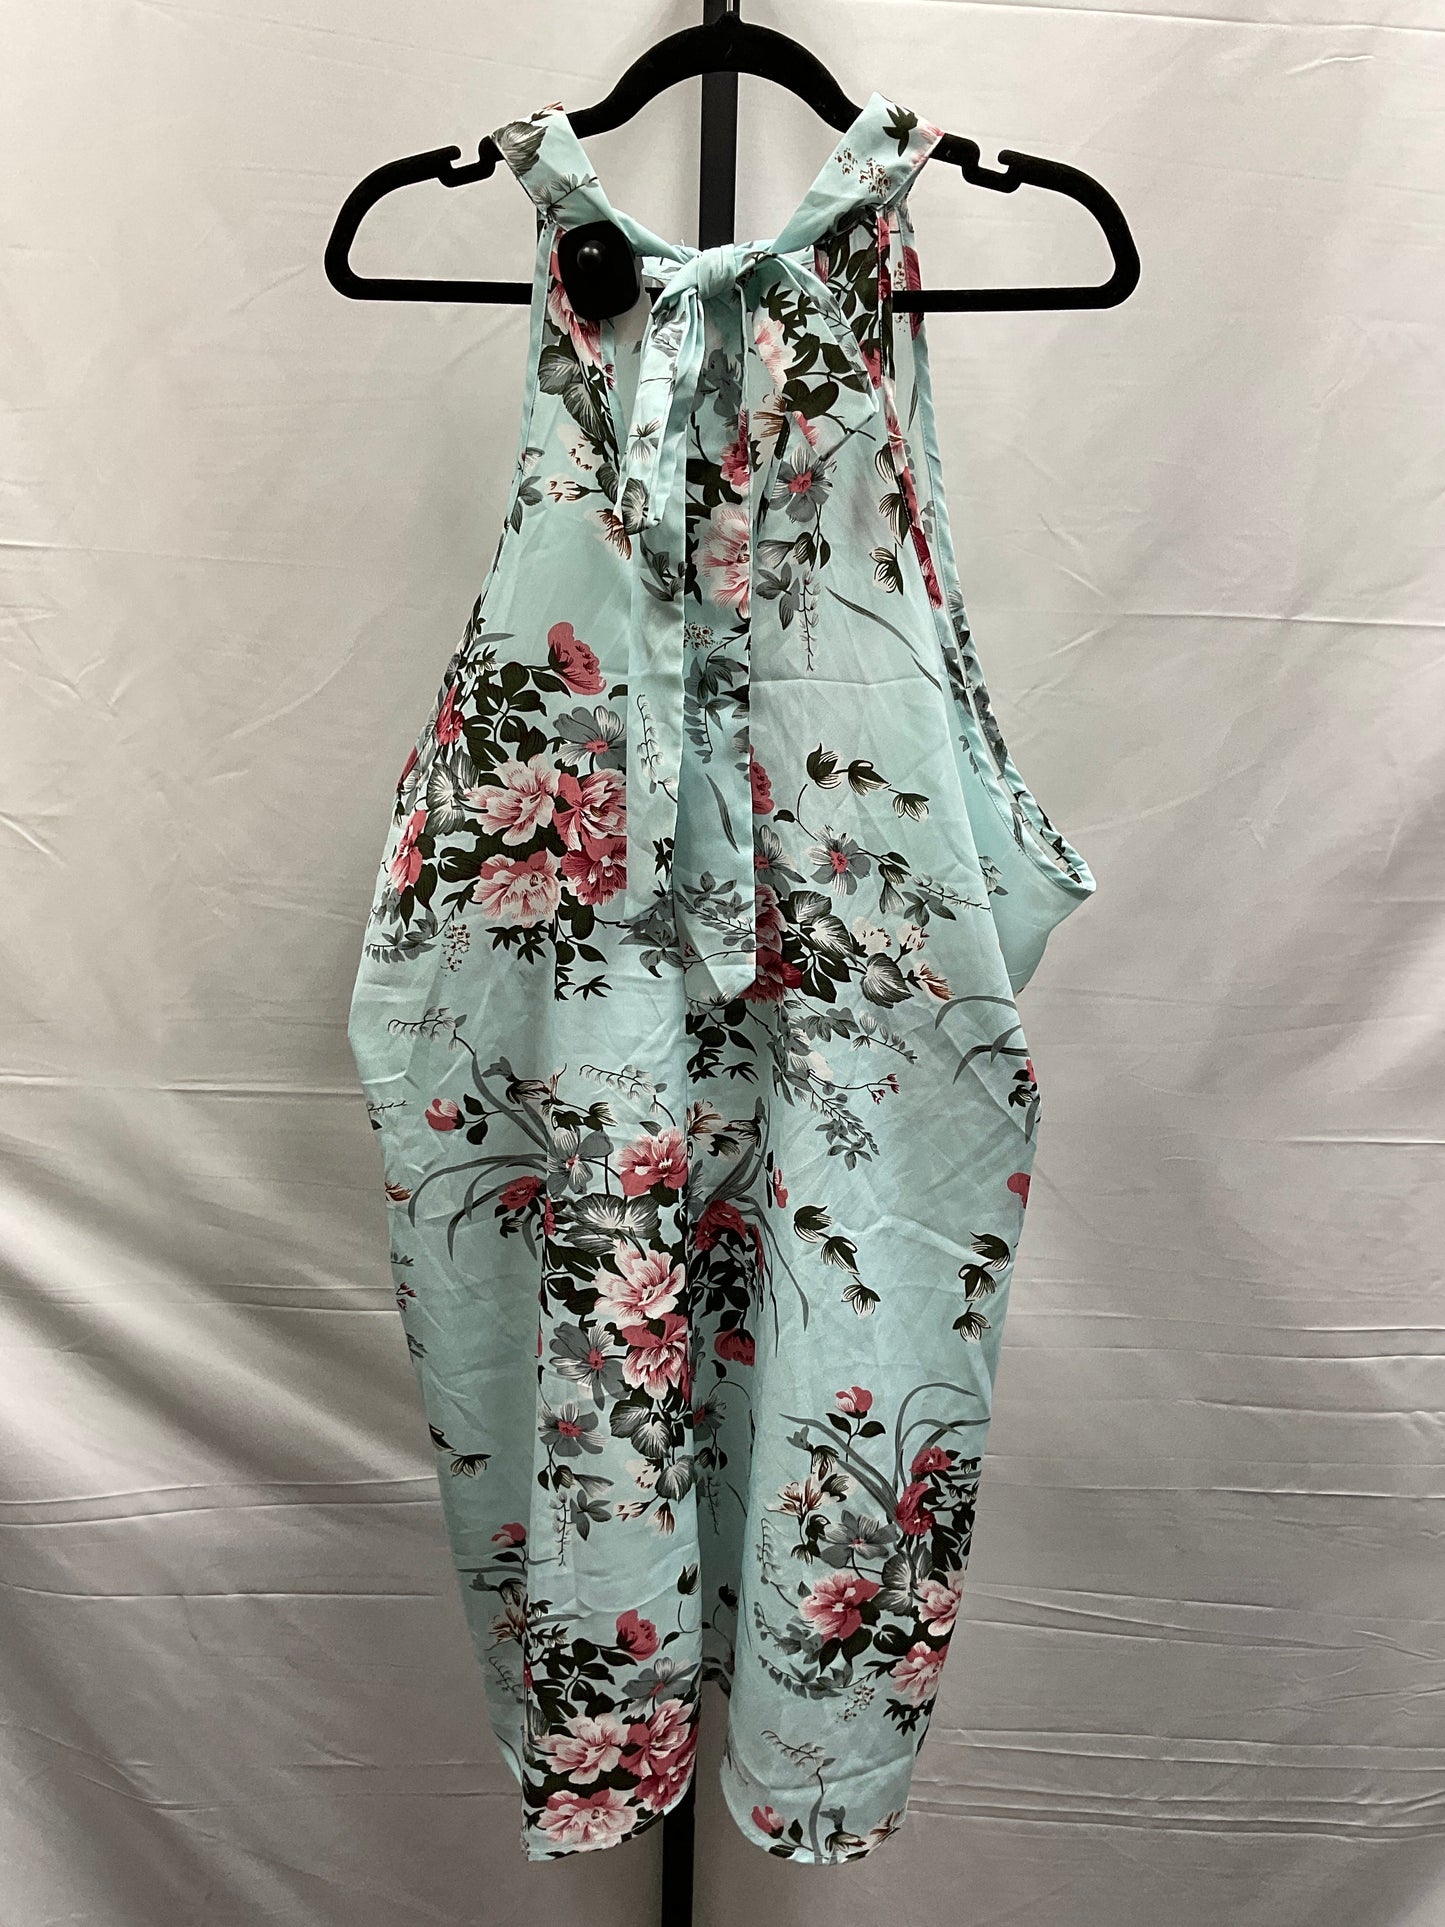 Floral Print Dress Casual Short Shein, Size 4x